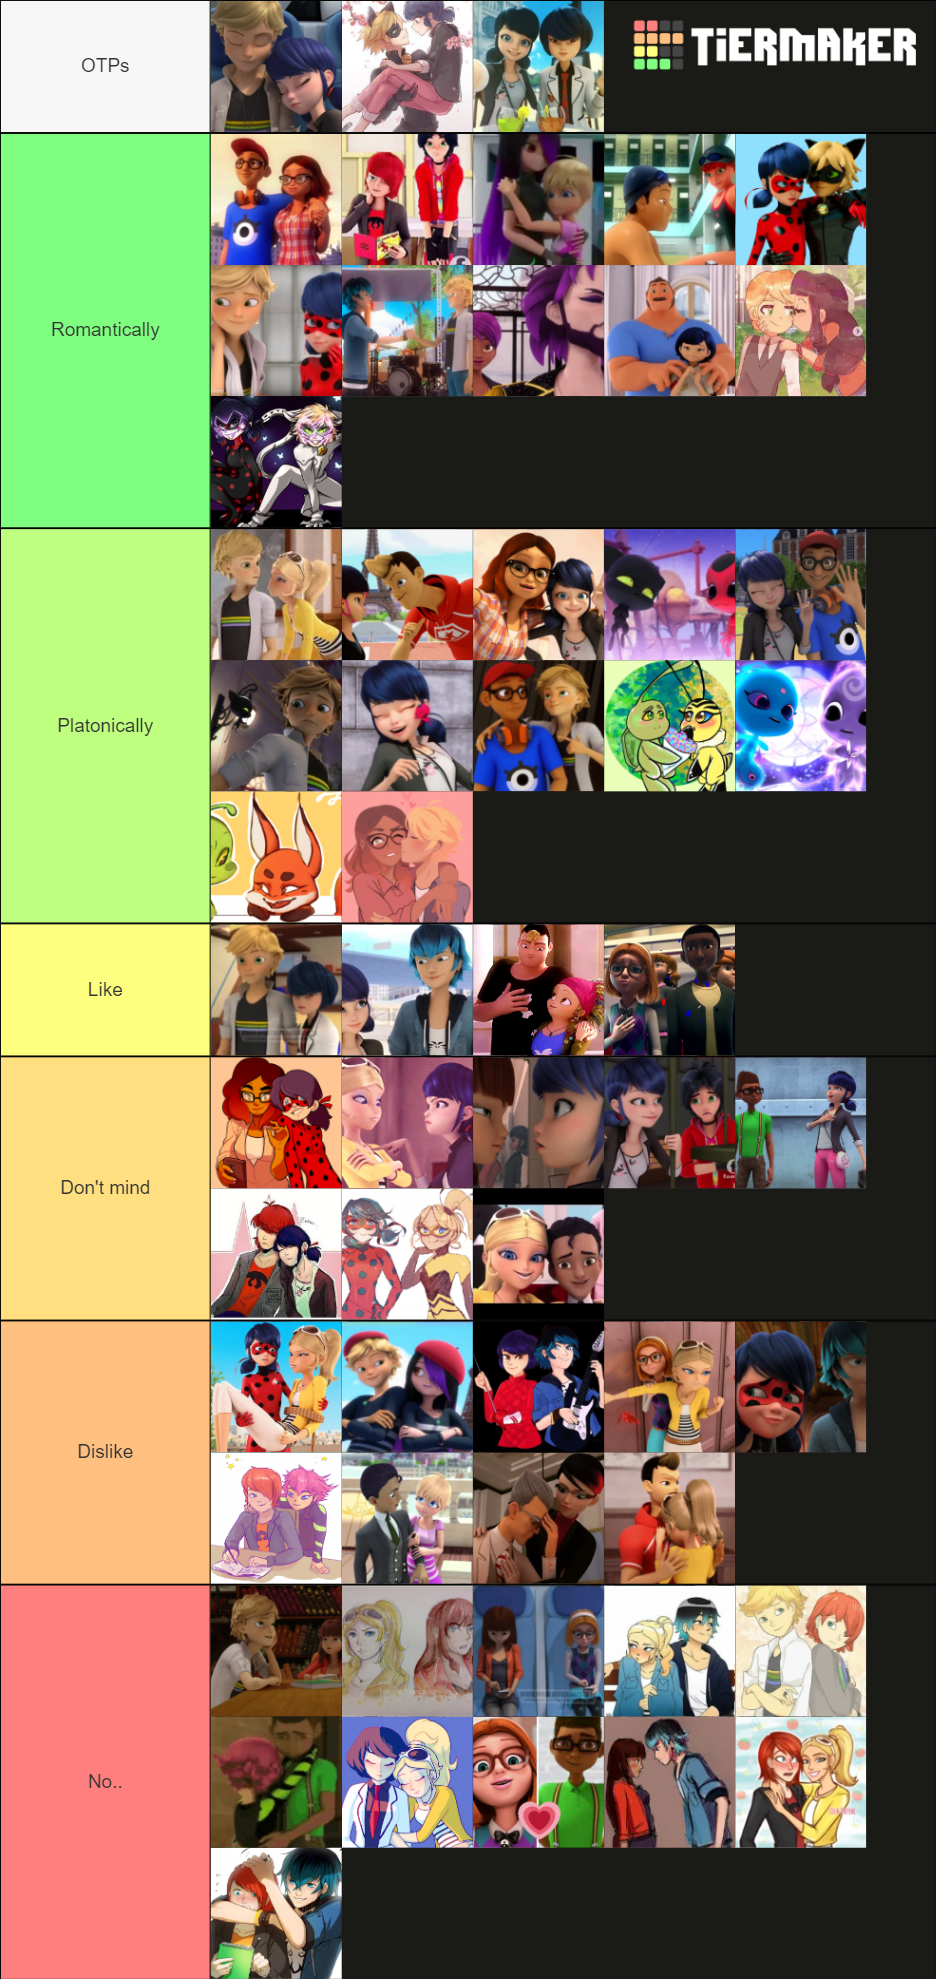 Create a Miraculous 150+ characters s1-s4 (SPOILERS) Tier List - TierMaker